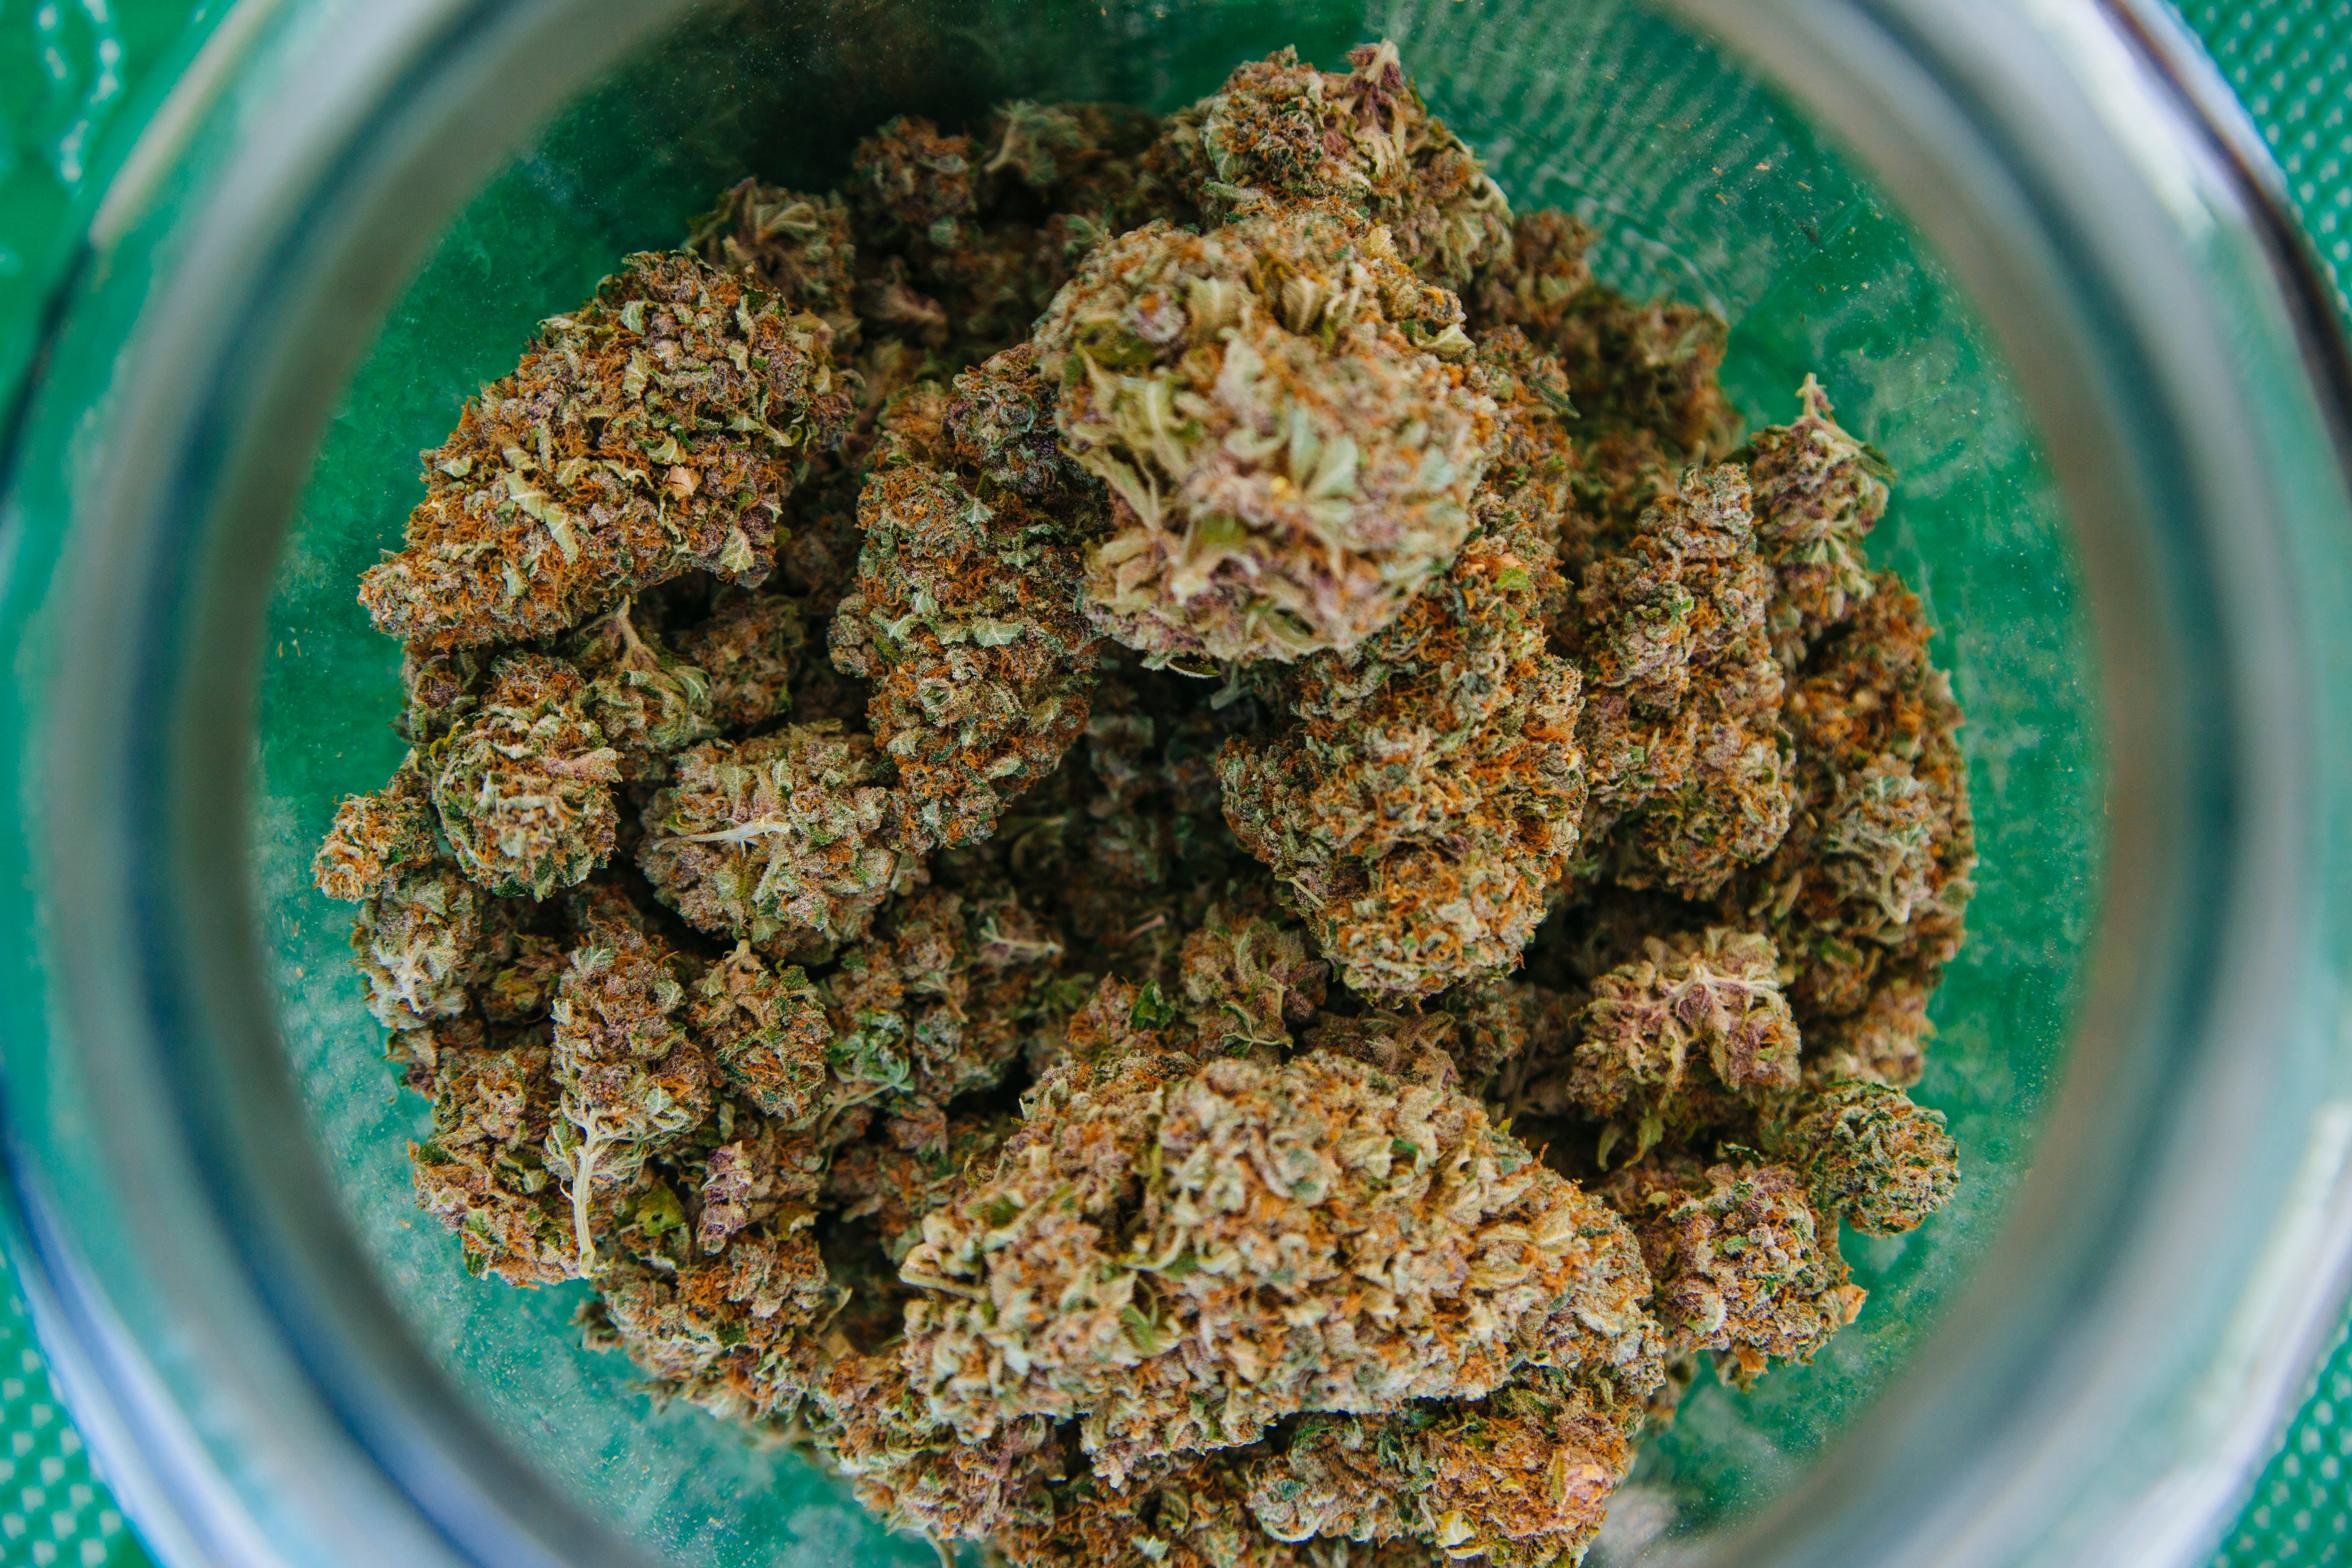 A large jar full of cannabis sits on display at the Buenas Ondas Collective, a San Diego medical marijuana delivery service, at the 2014 Cannabis Cup. (Washington Post/Getty Images)